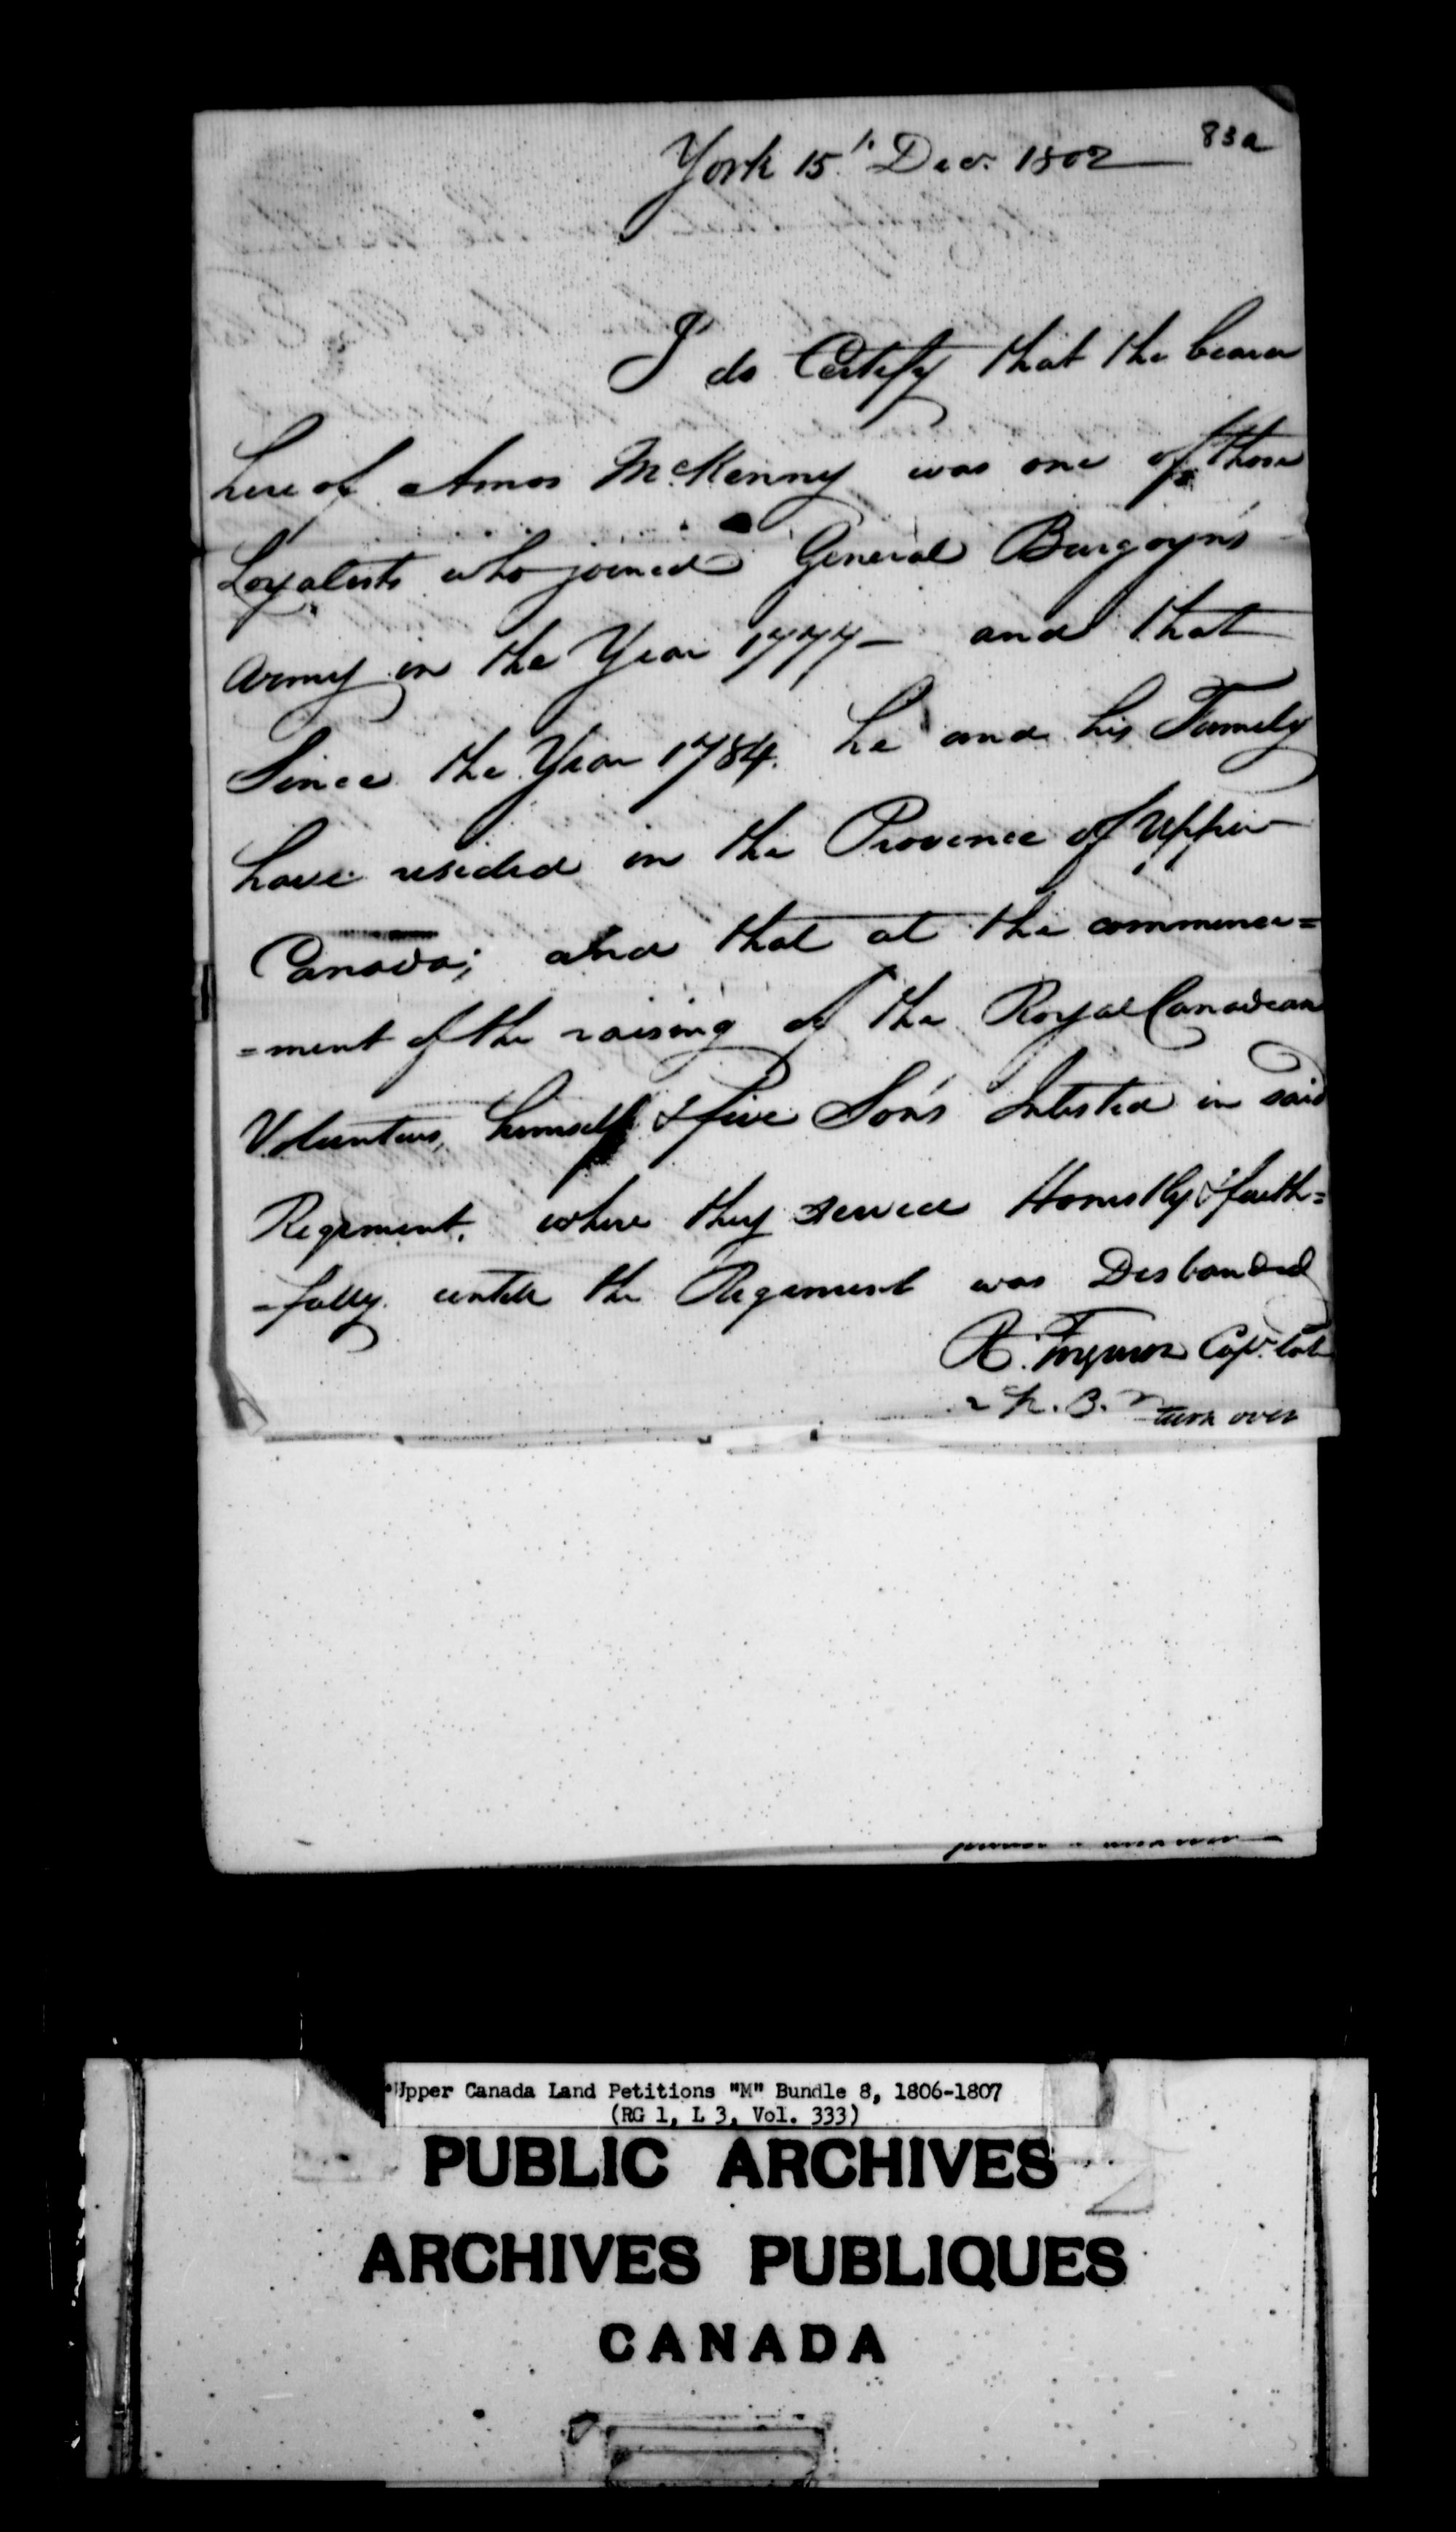 Title: Upper Canada Land Petitions (1763-1865) - Mikan Number: 205131 - Microform: c-2195